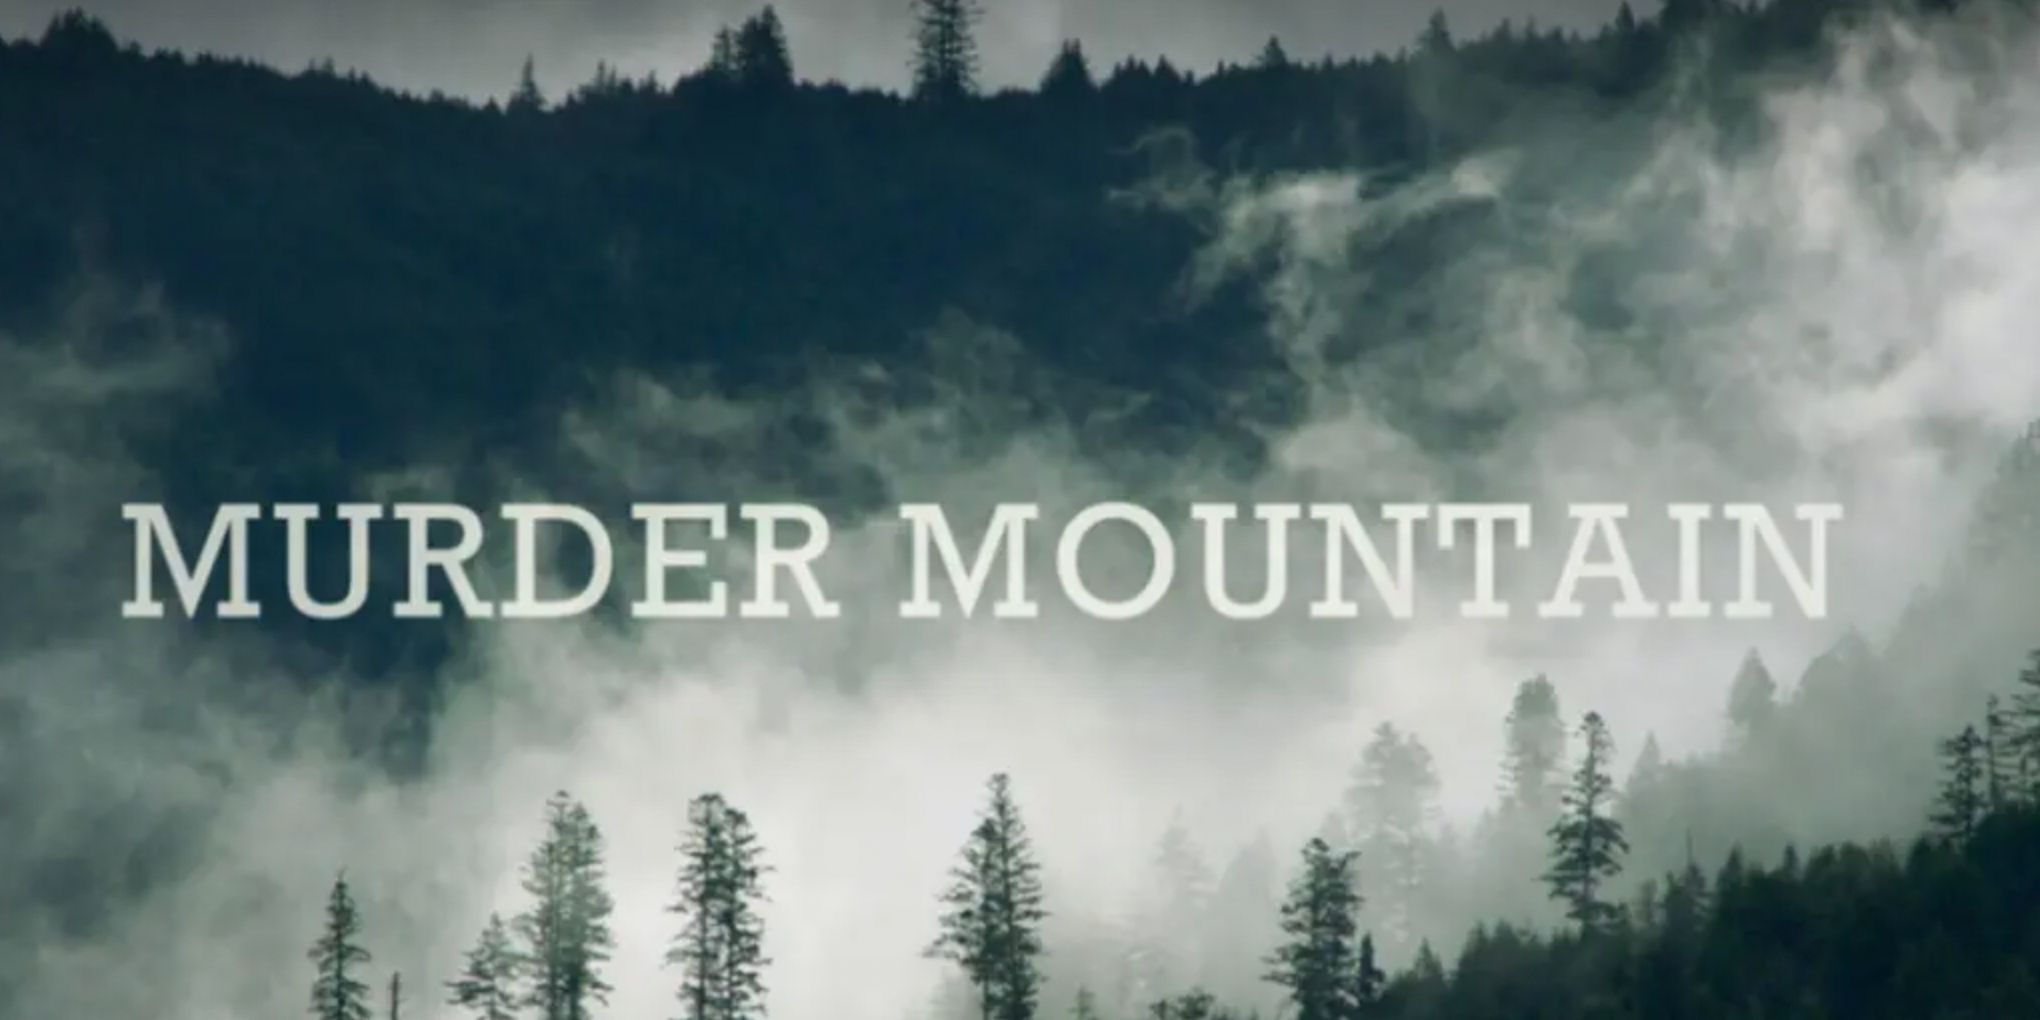 The Murder Mountain title card features the title of the series in white letters over a misty mountain side